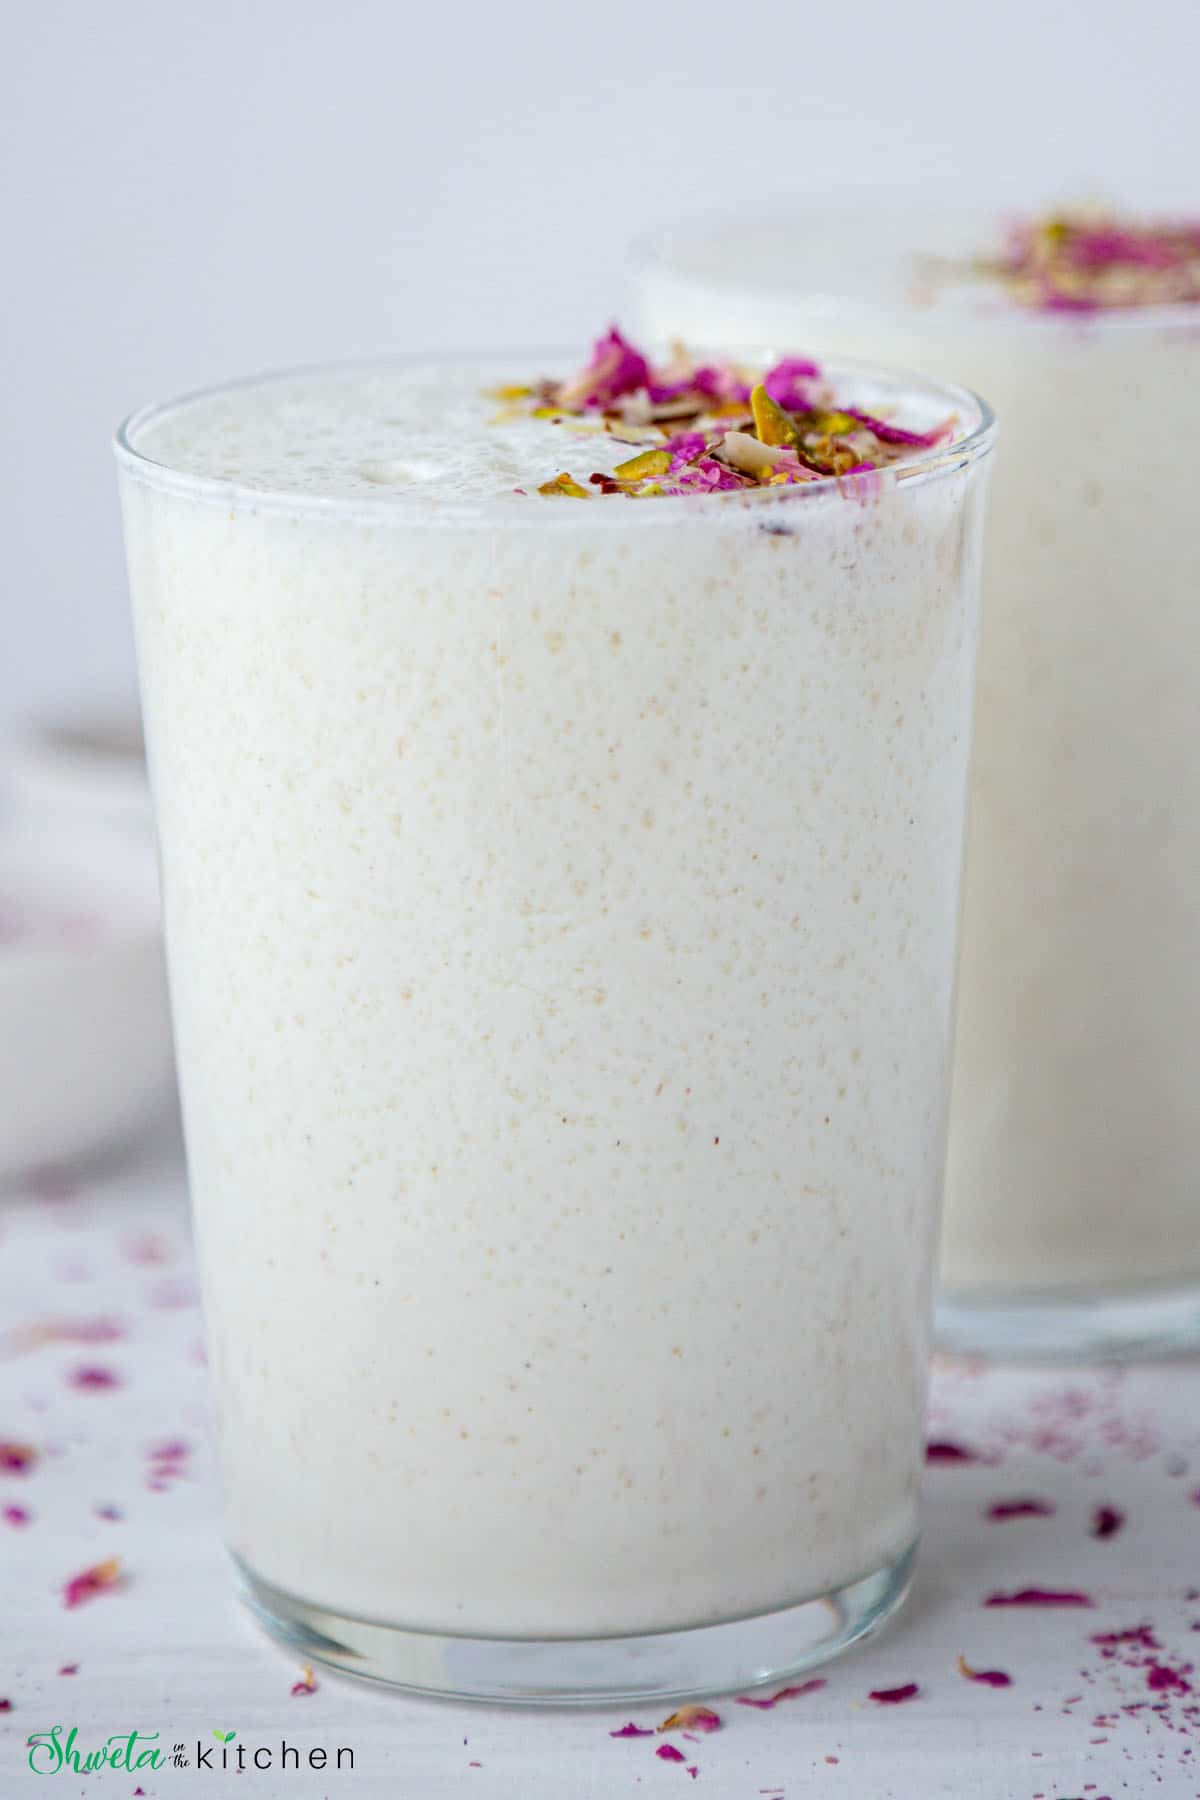 Front view of sweet lassi glass filled till rim and garnished.